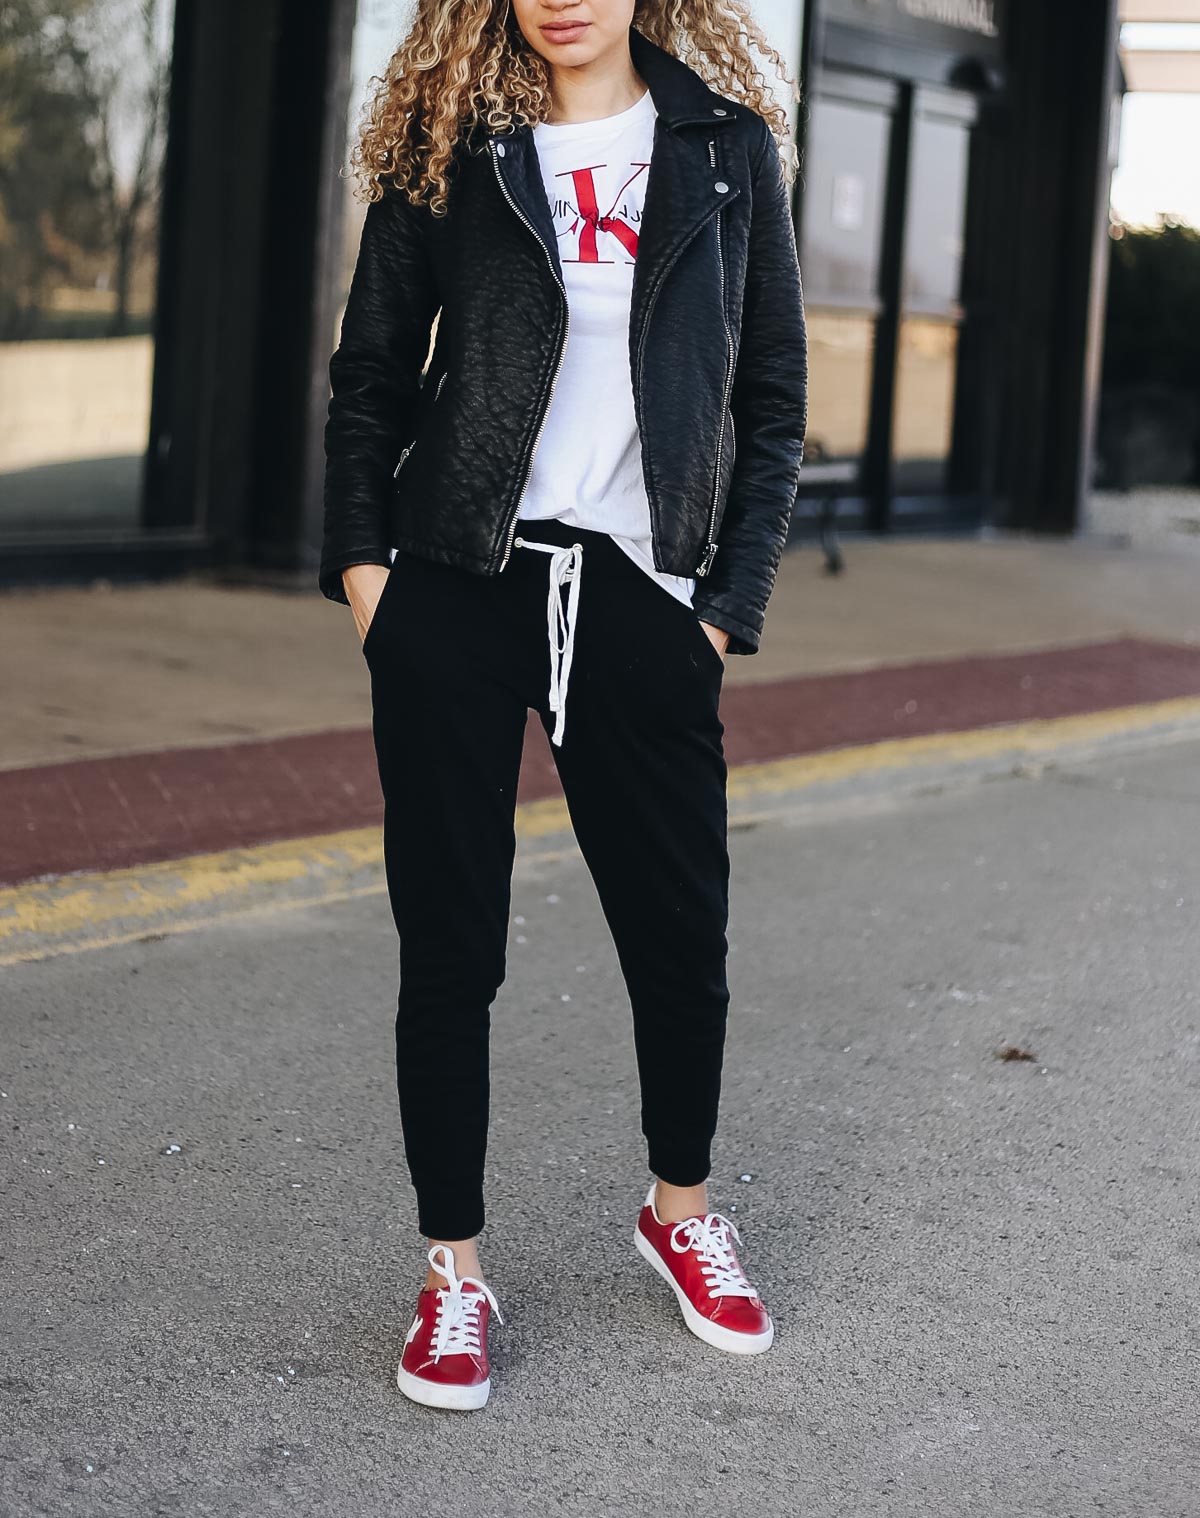 comfy airport outfit with joggers and sneakers